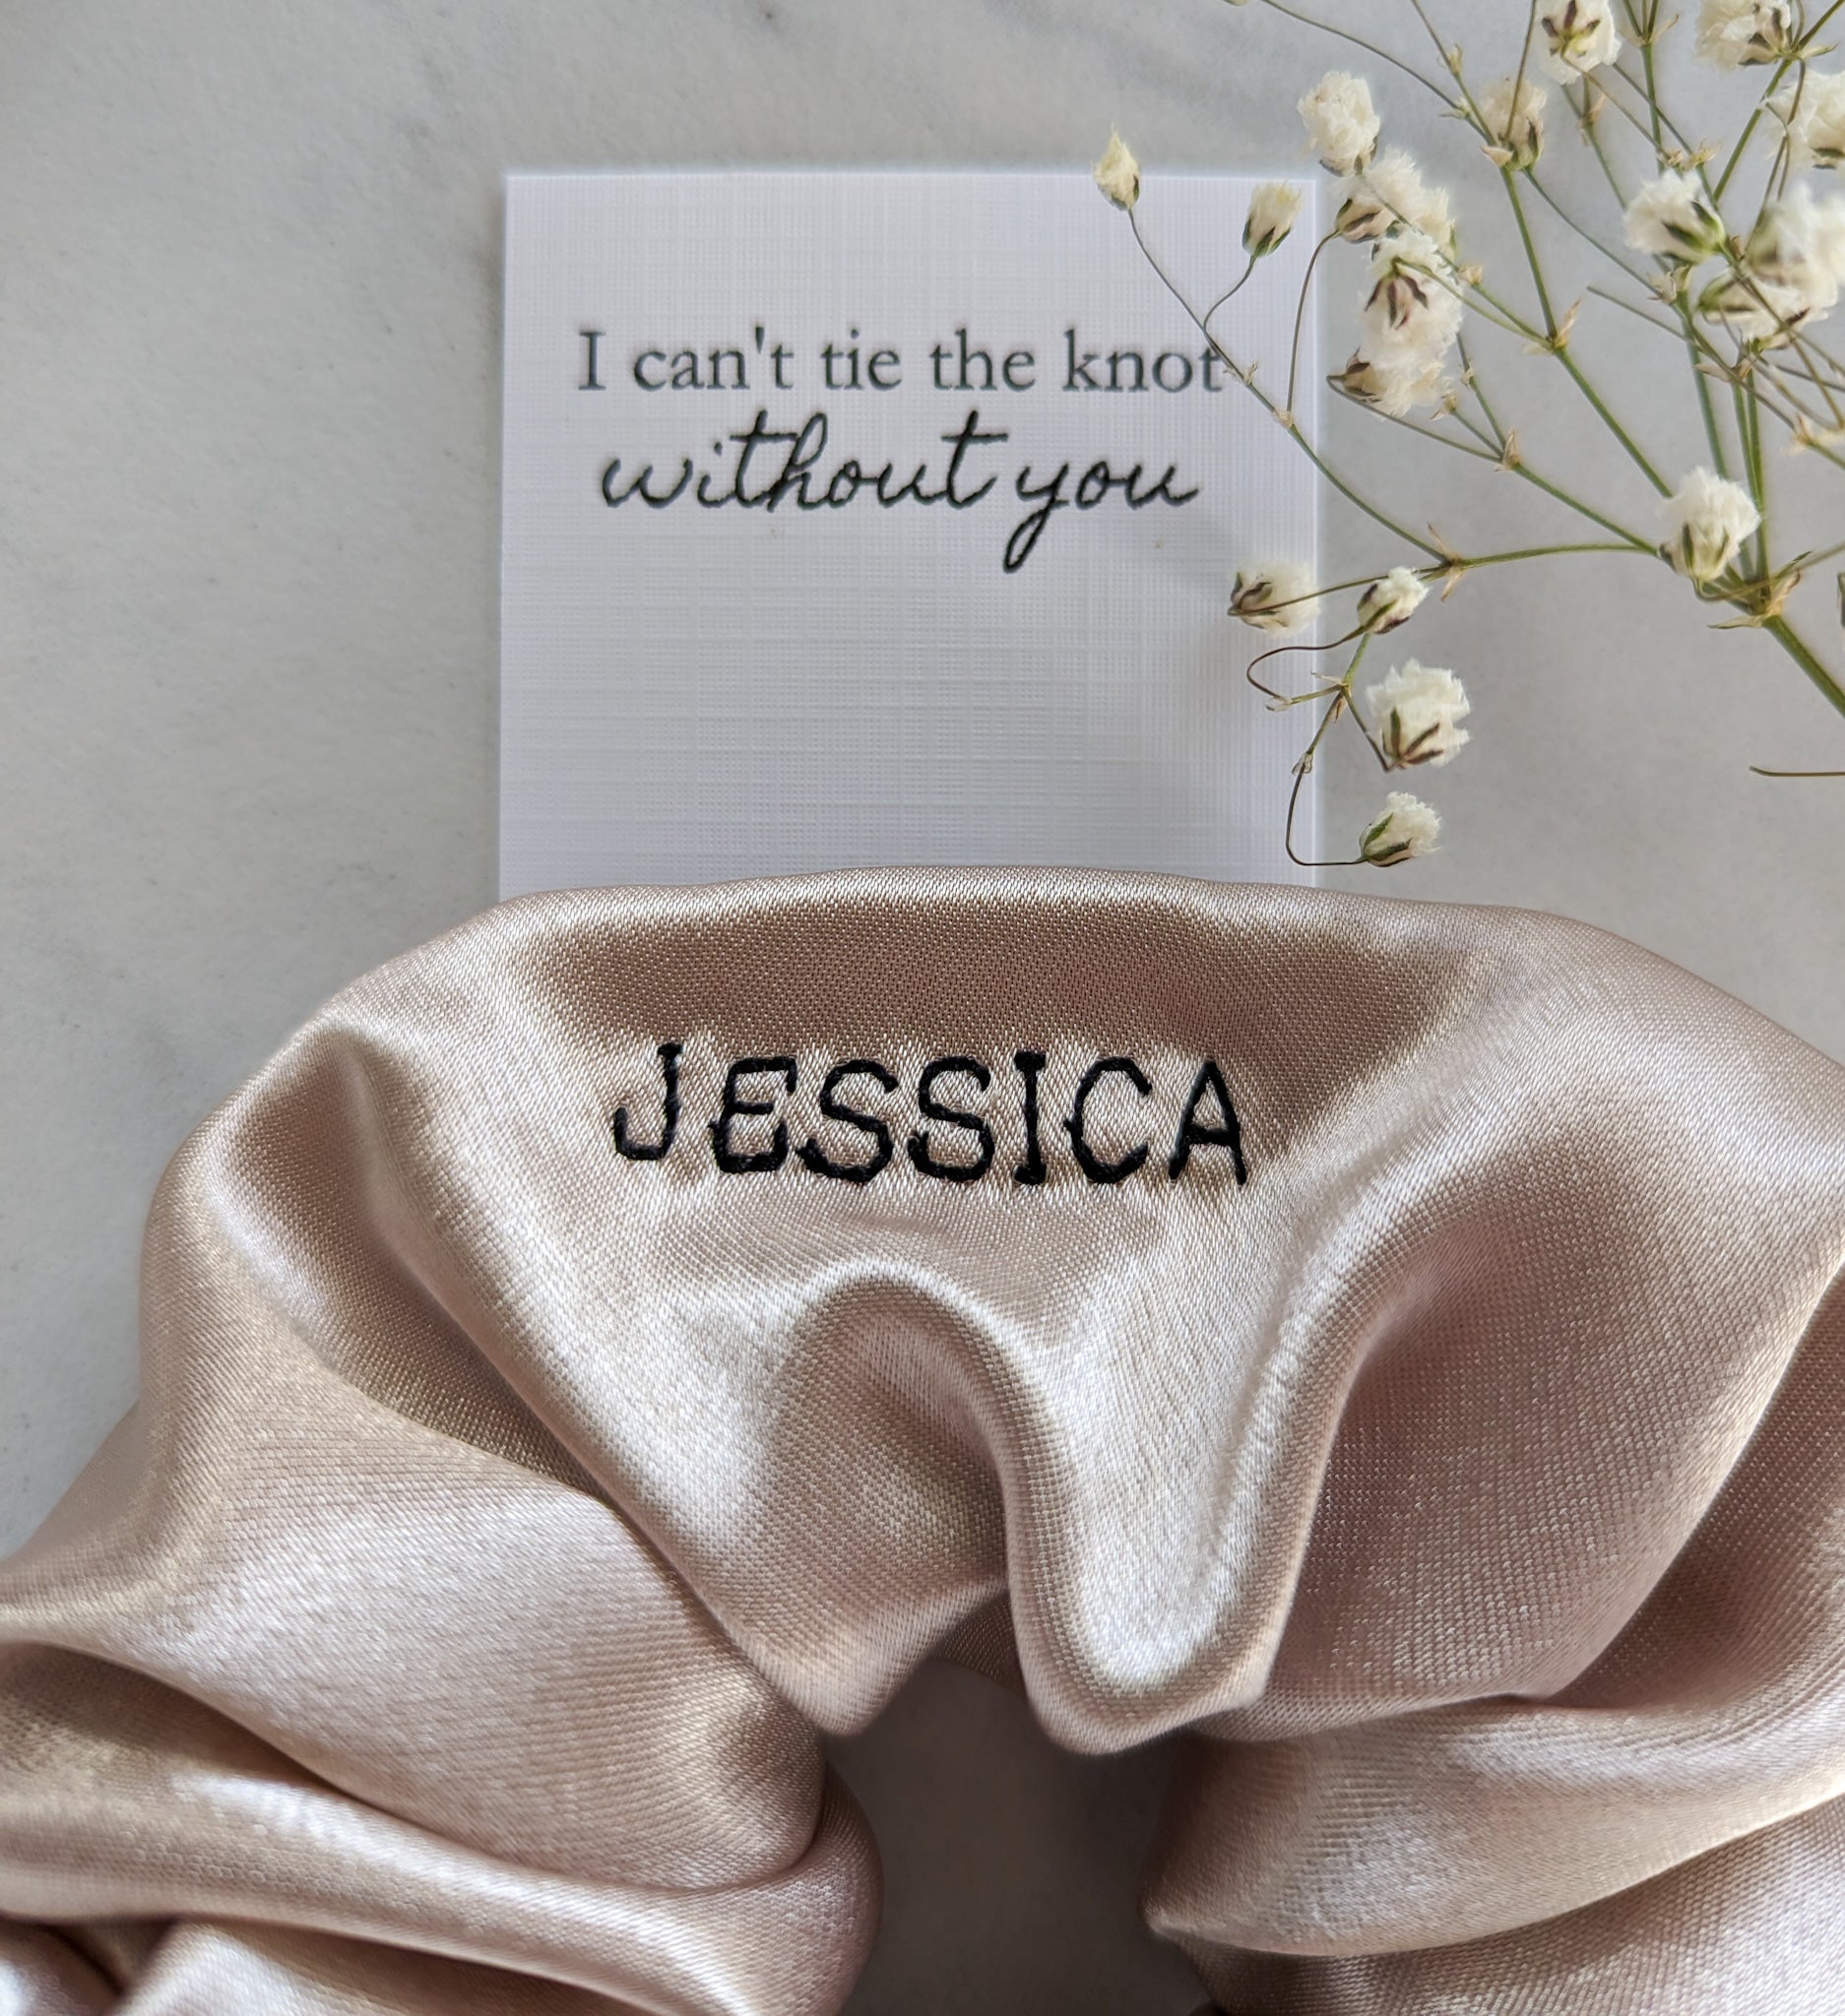 champagne satin scrunchie for bridesmaid proposal box, I can't tie the knot without you card included and a branded bag